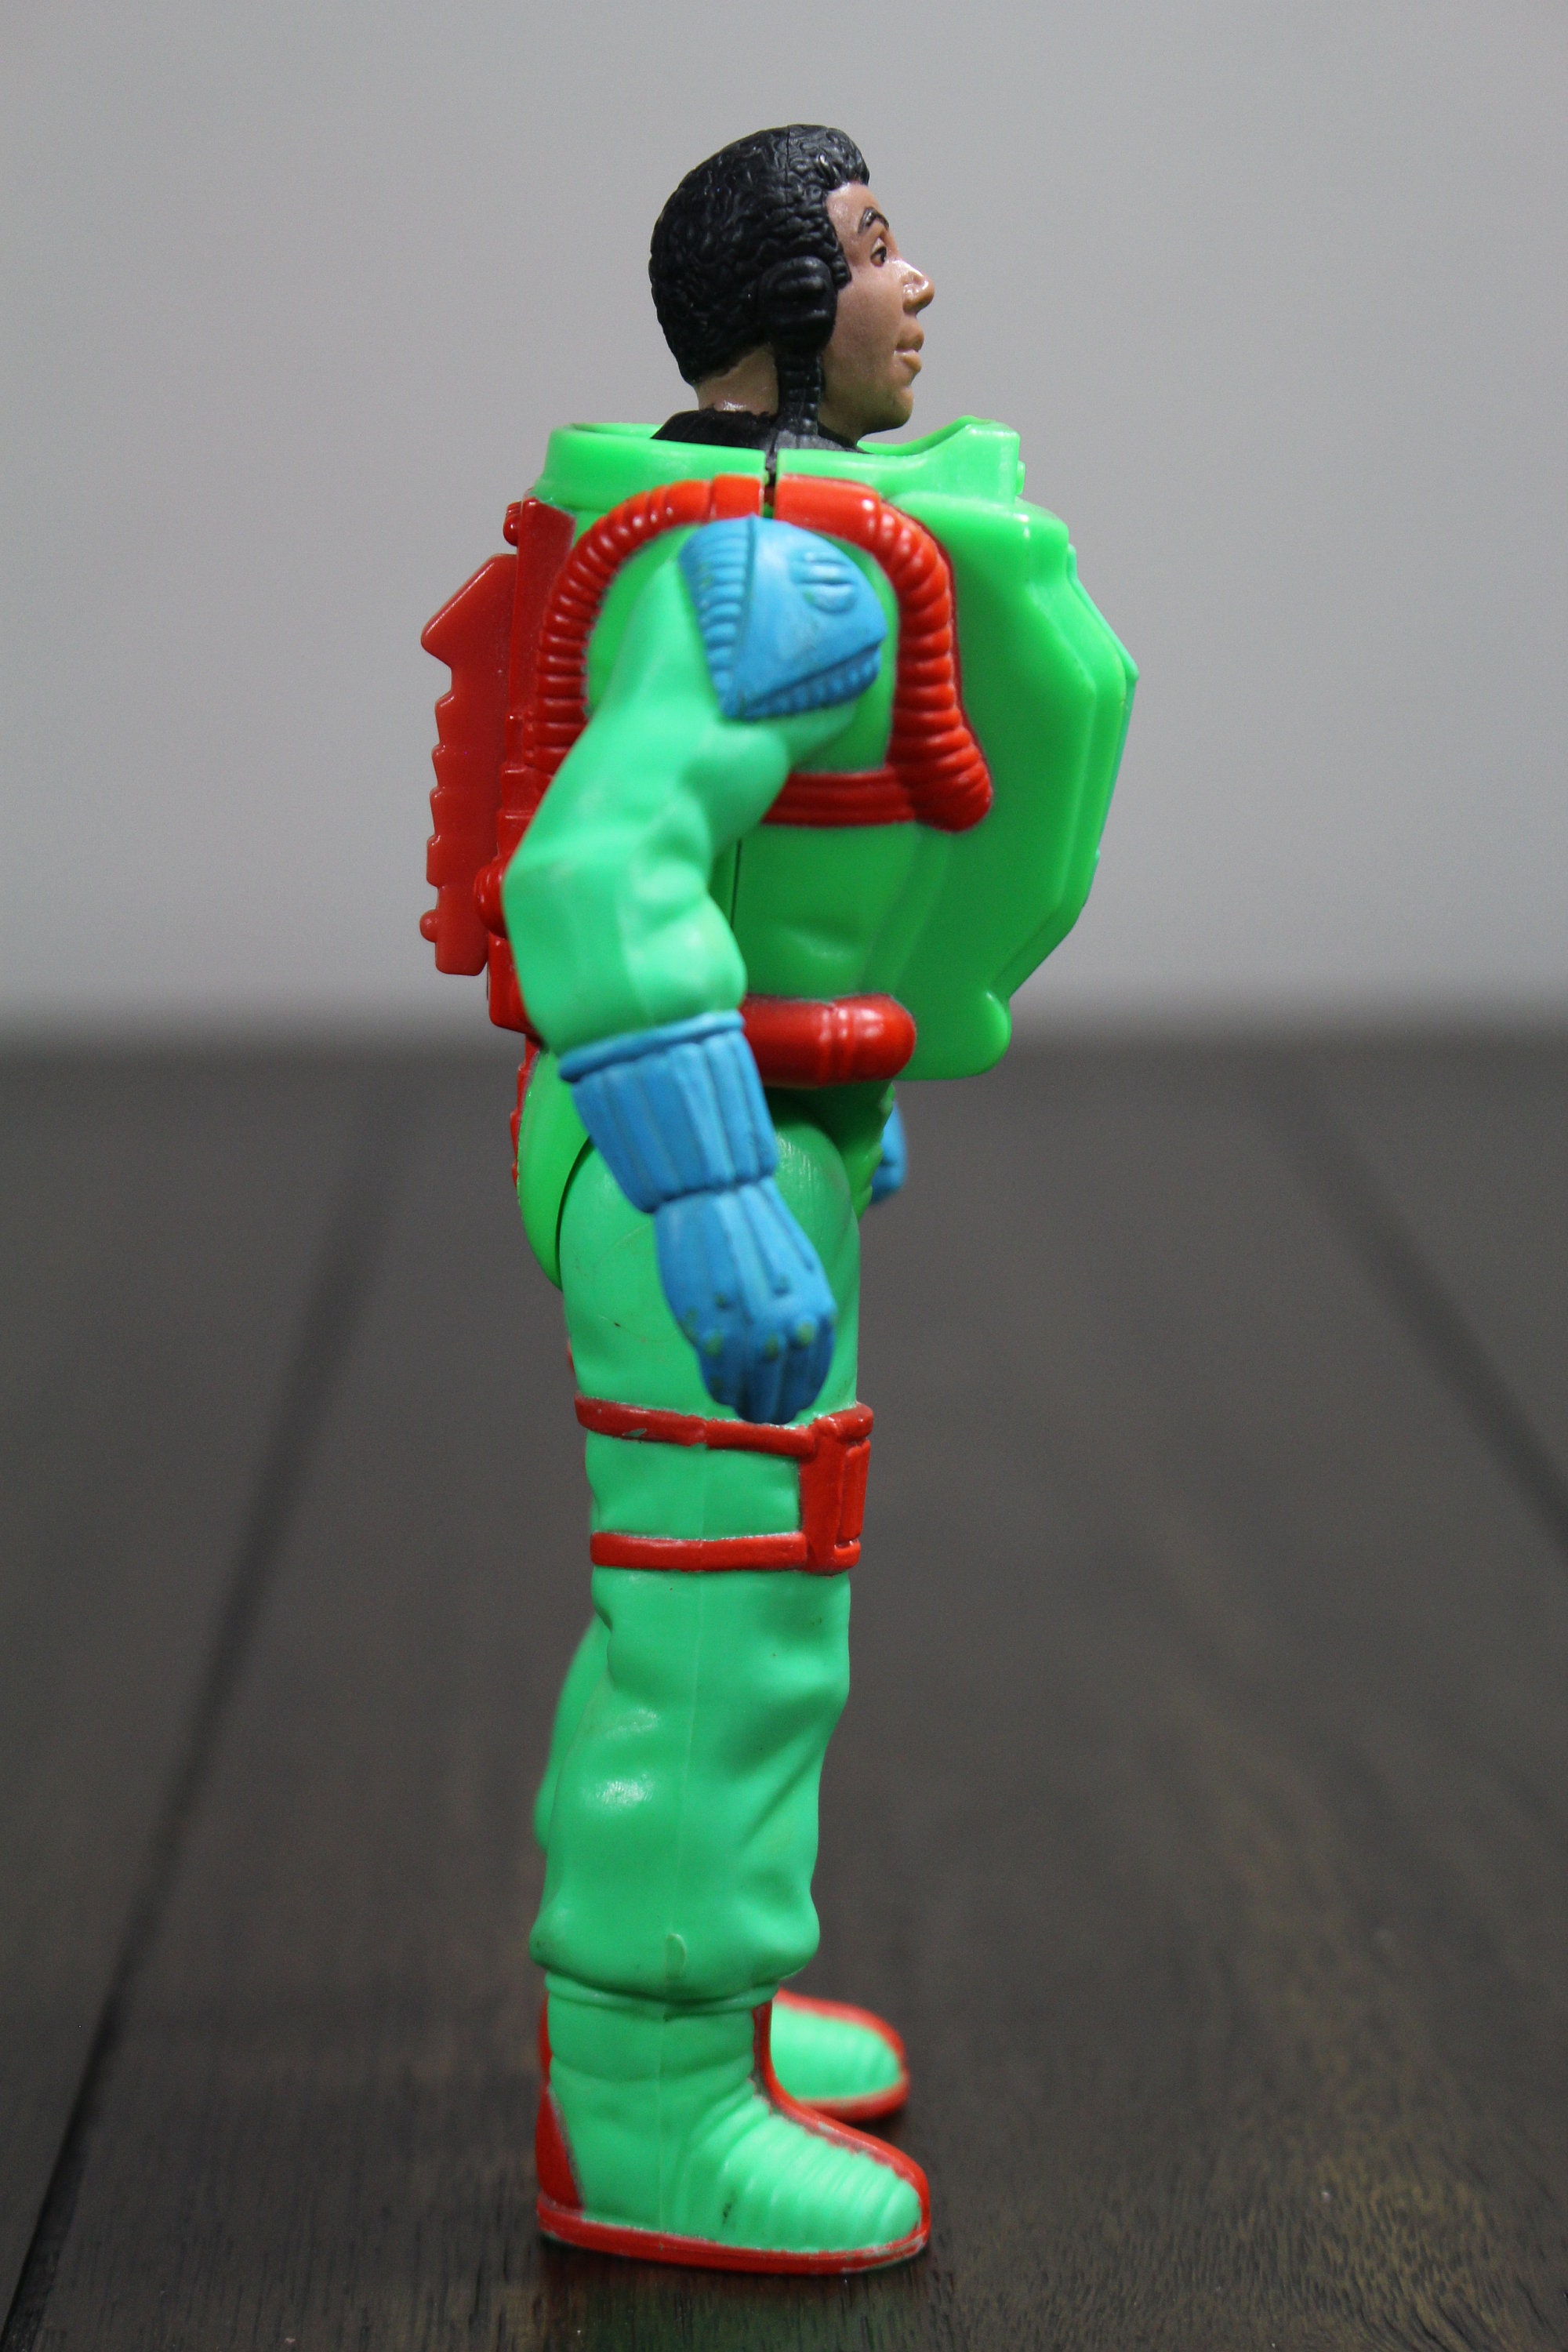 WINSTON VINTAGE 1989 KENNER FIGURE NM REAL GHOSTBUSTERS GREEN WEAPON 